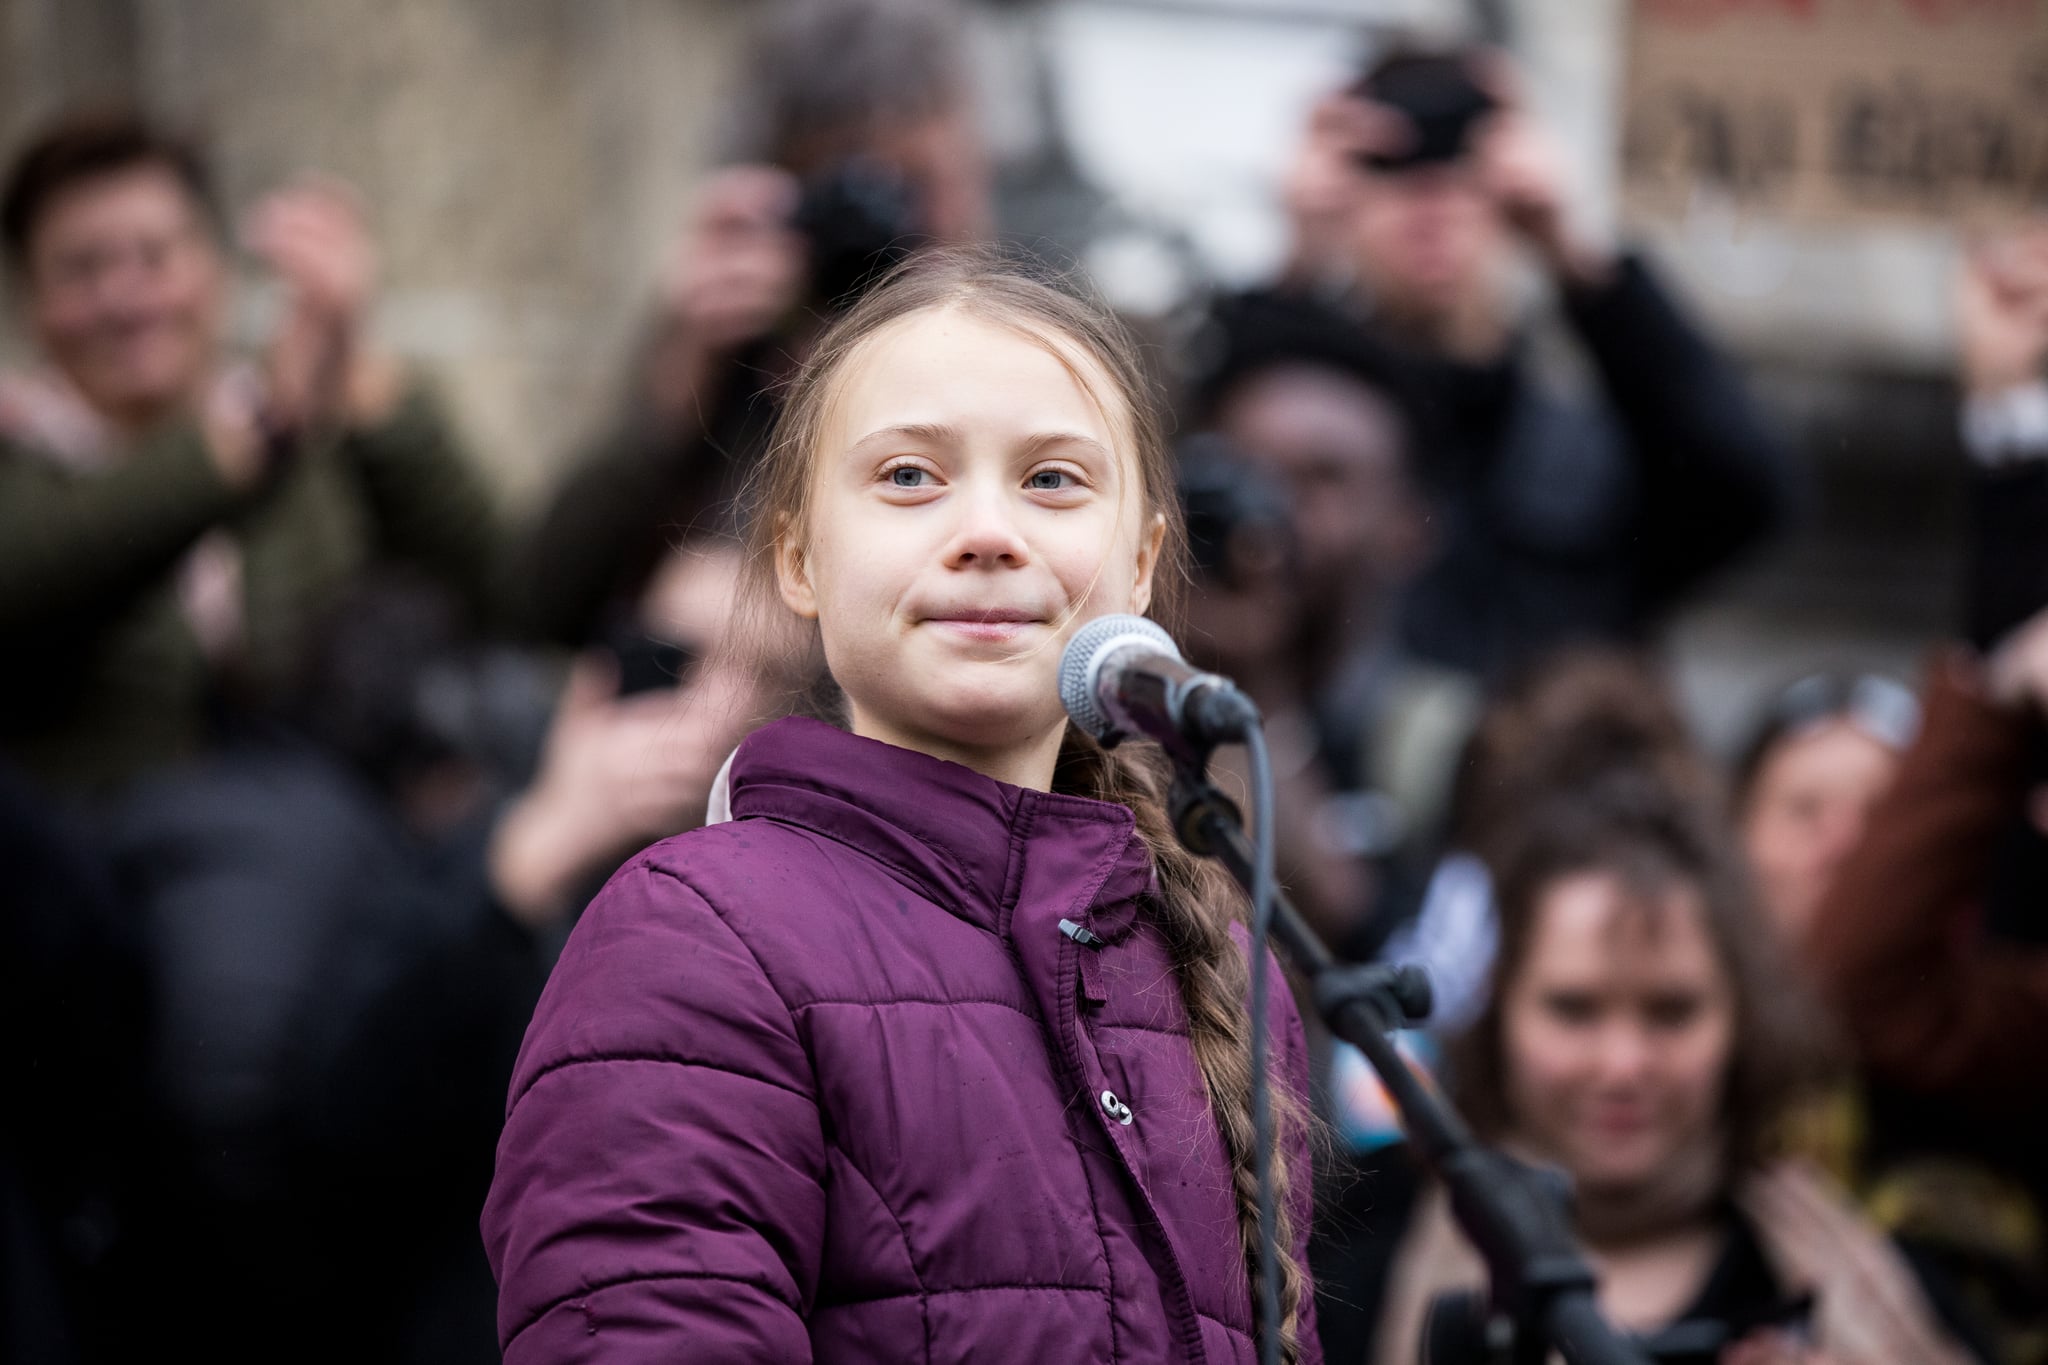 LAUSANNE, SWITZERLAND - JANUARY 17: Swedish climate activist Greta Thunberg speaks to participants at a climate change protest on January 17, 2020 in Lausanne, Switzerland. The protest is taking place ahead of the upcoming annual gathering of world leaders at the Davos World Economic Forum. (Photo by Ronald Patrick/Getty Images)